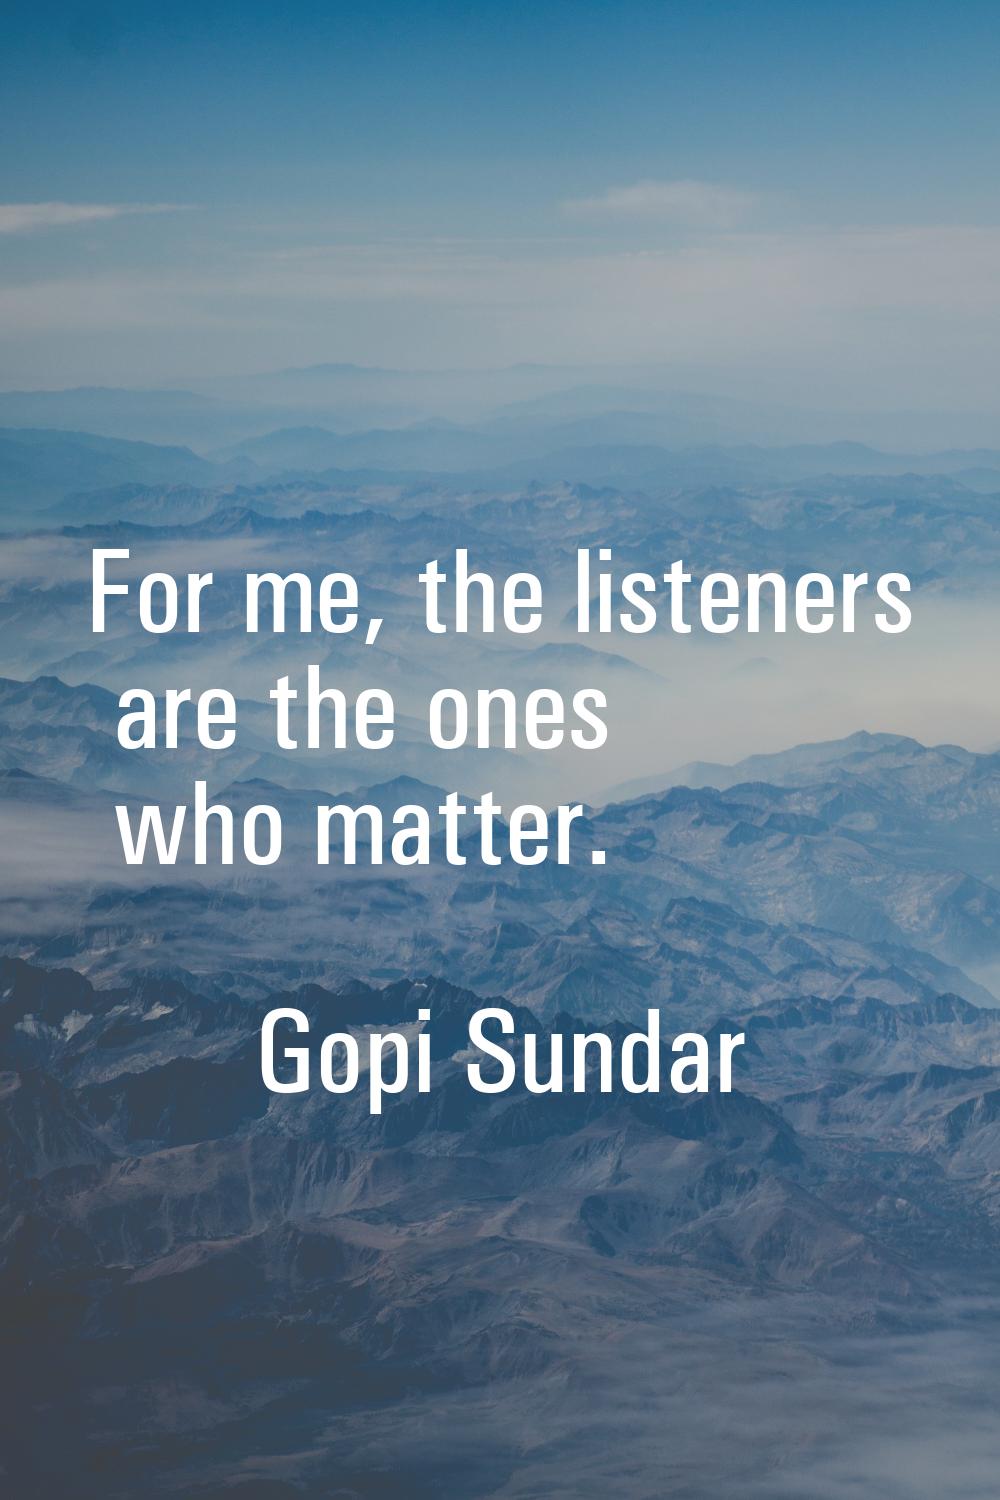 For me, the listeners are the ones who matter.